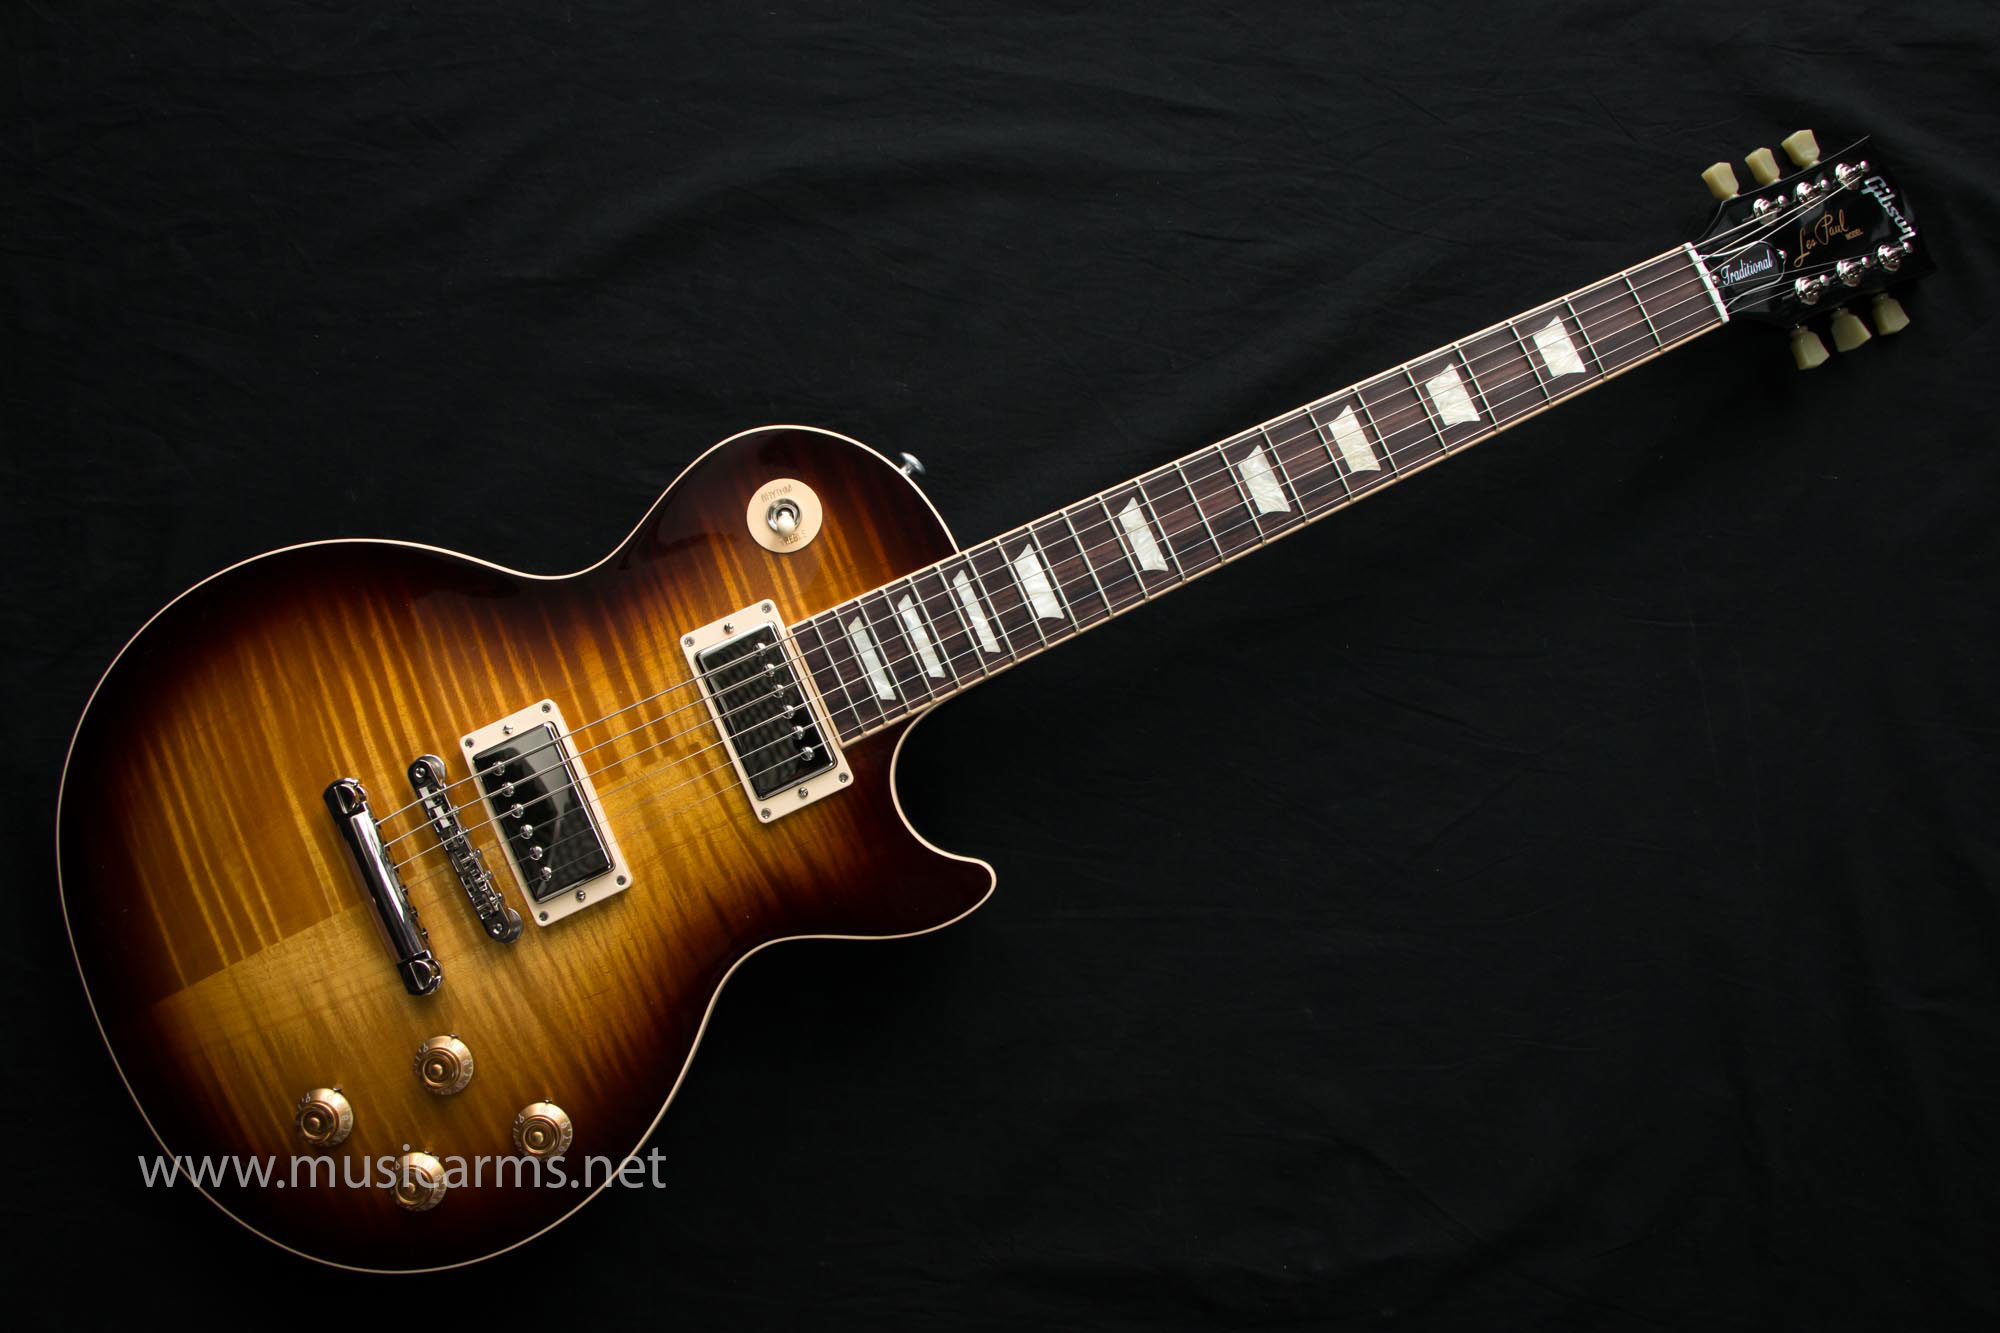 Gibson Les Paul Traditional 2018